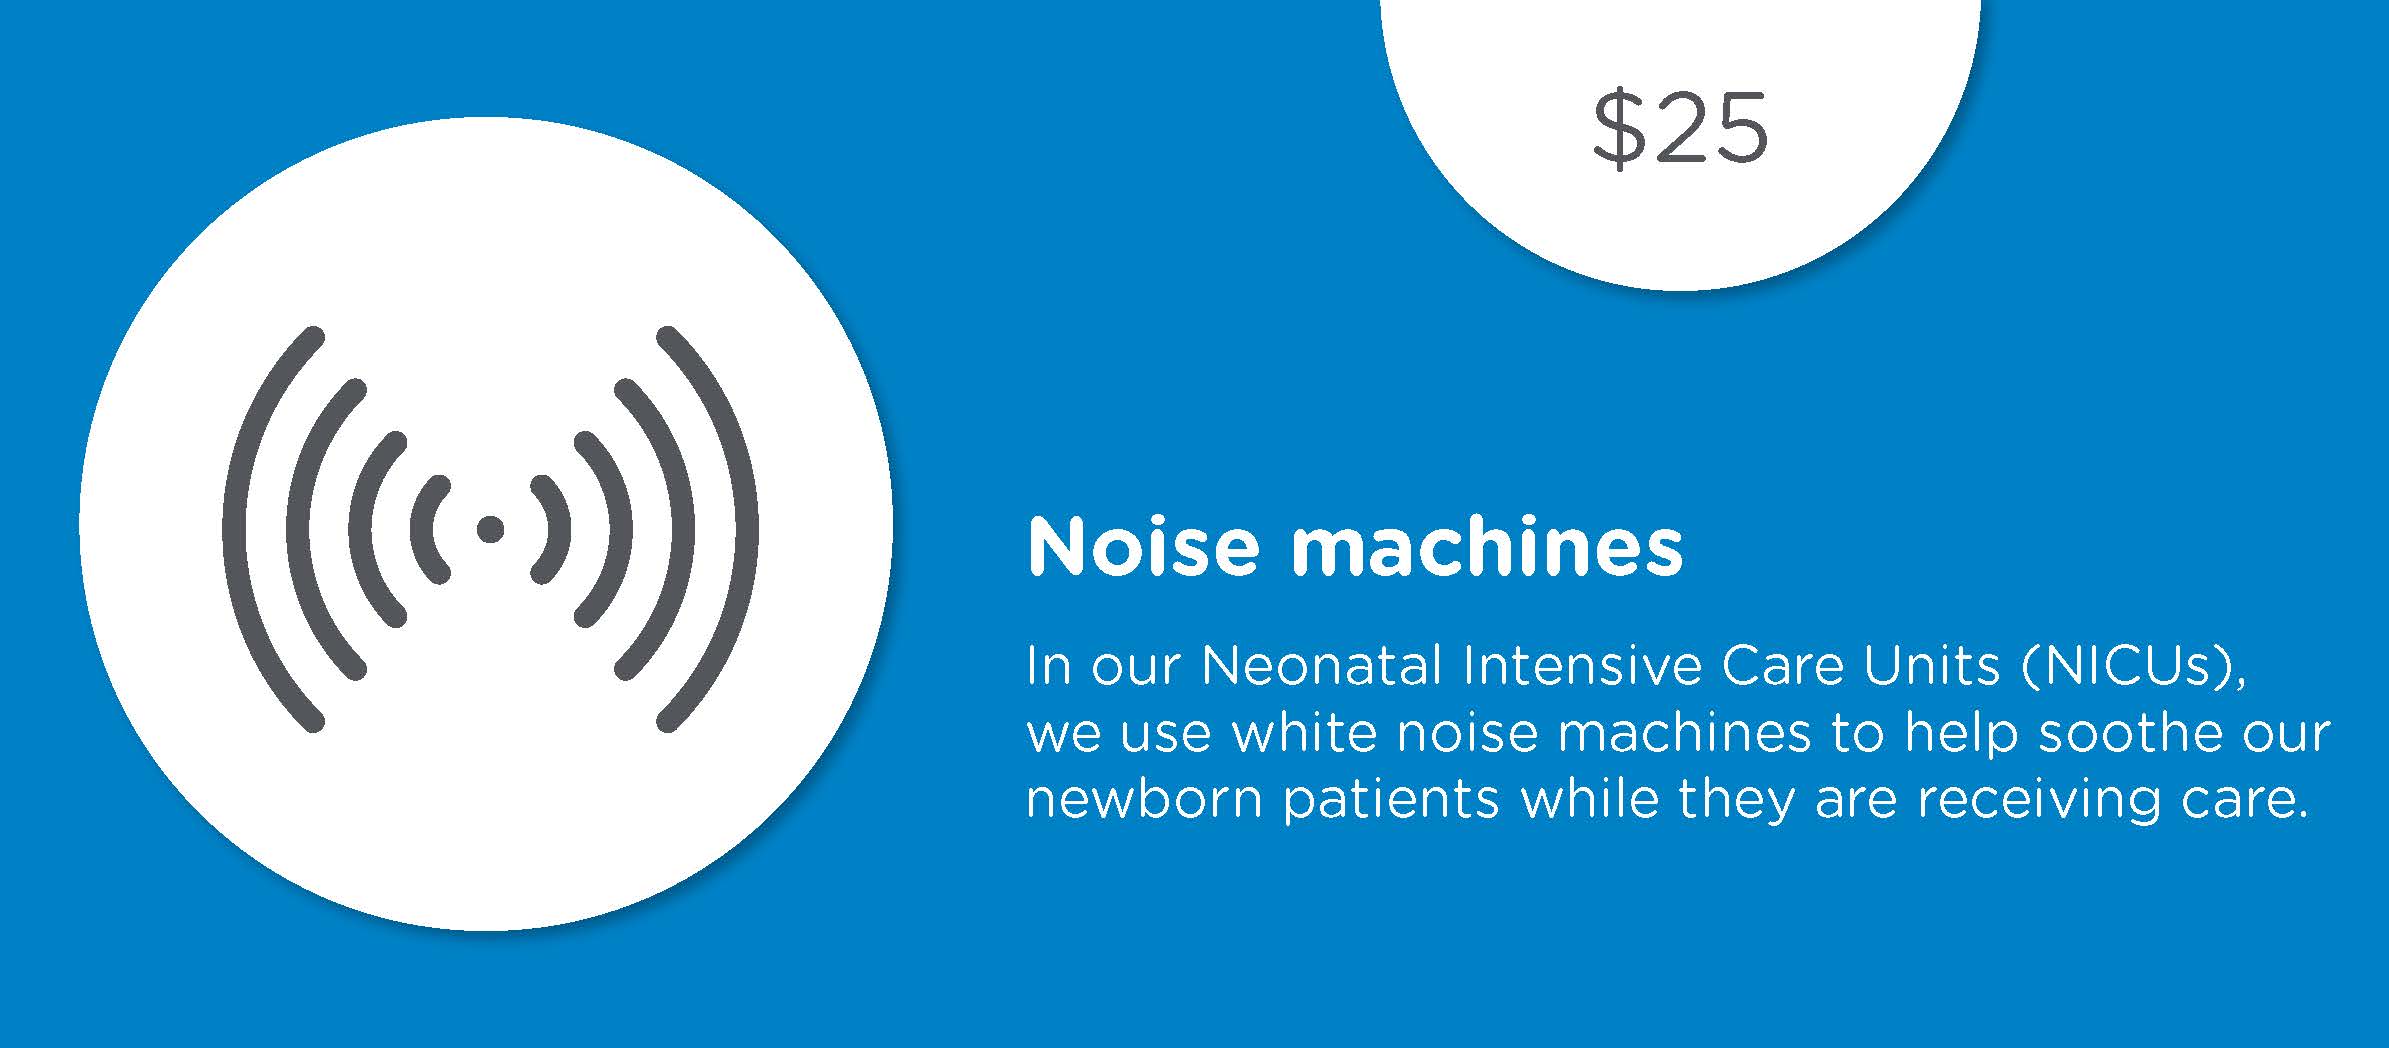 cost of noise machines for pediatric hospital